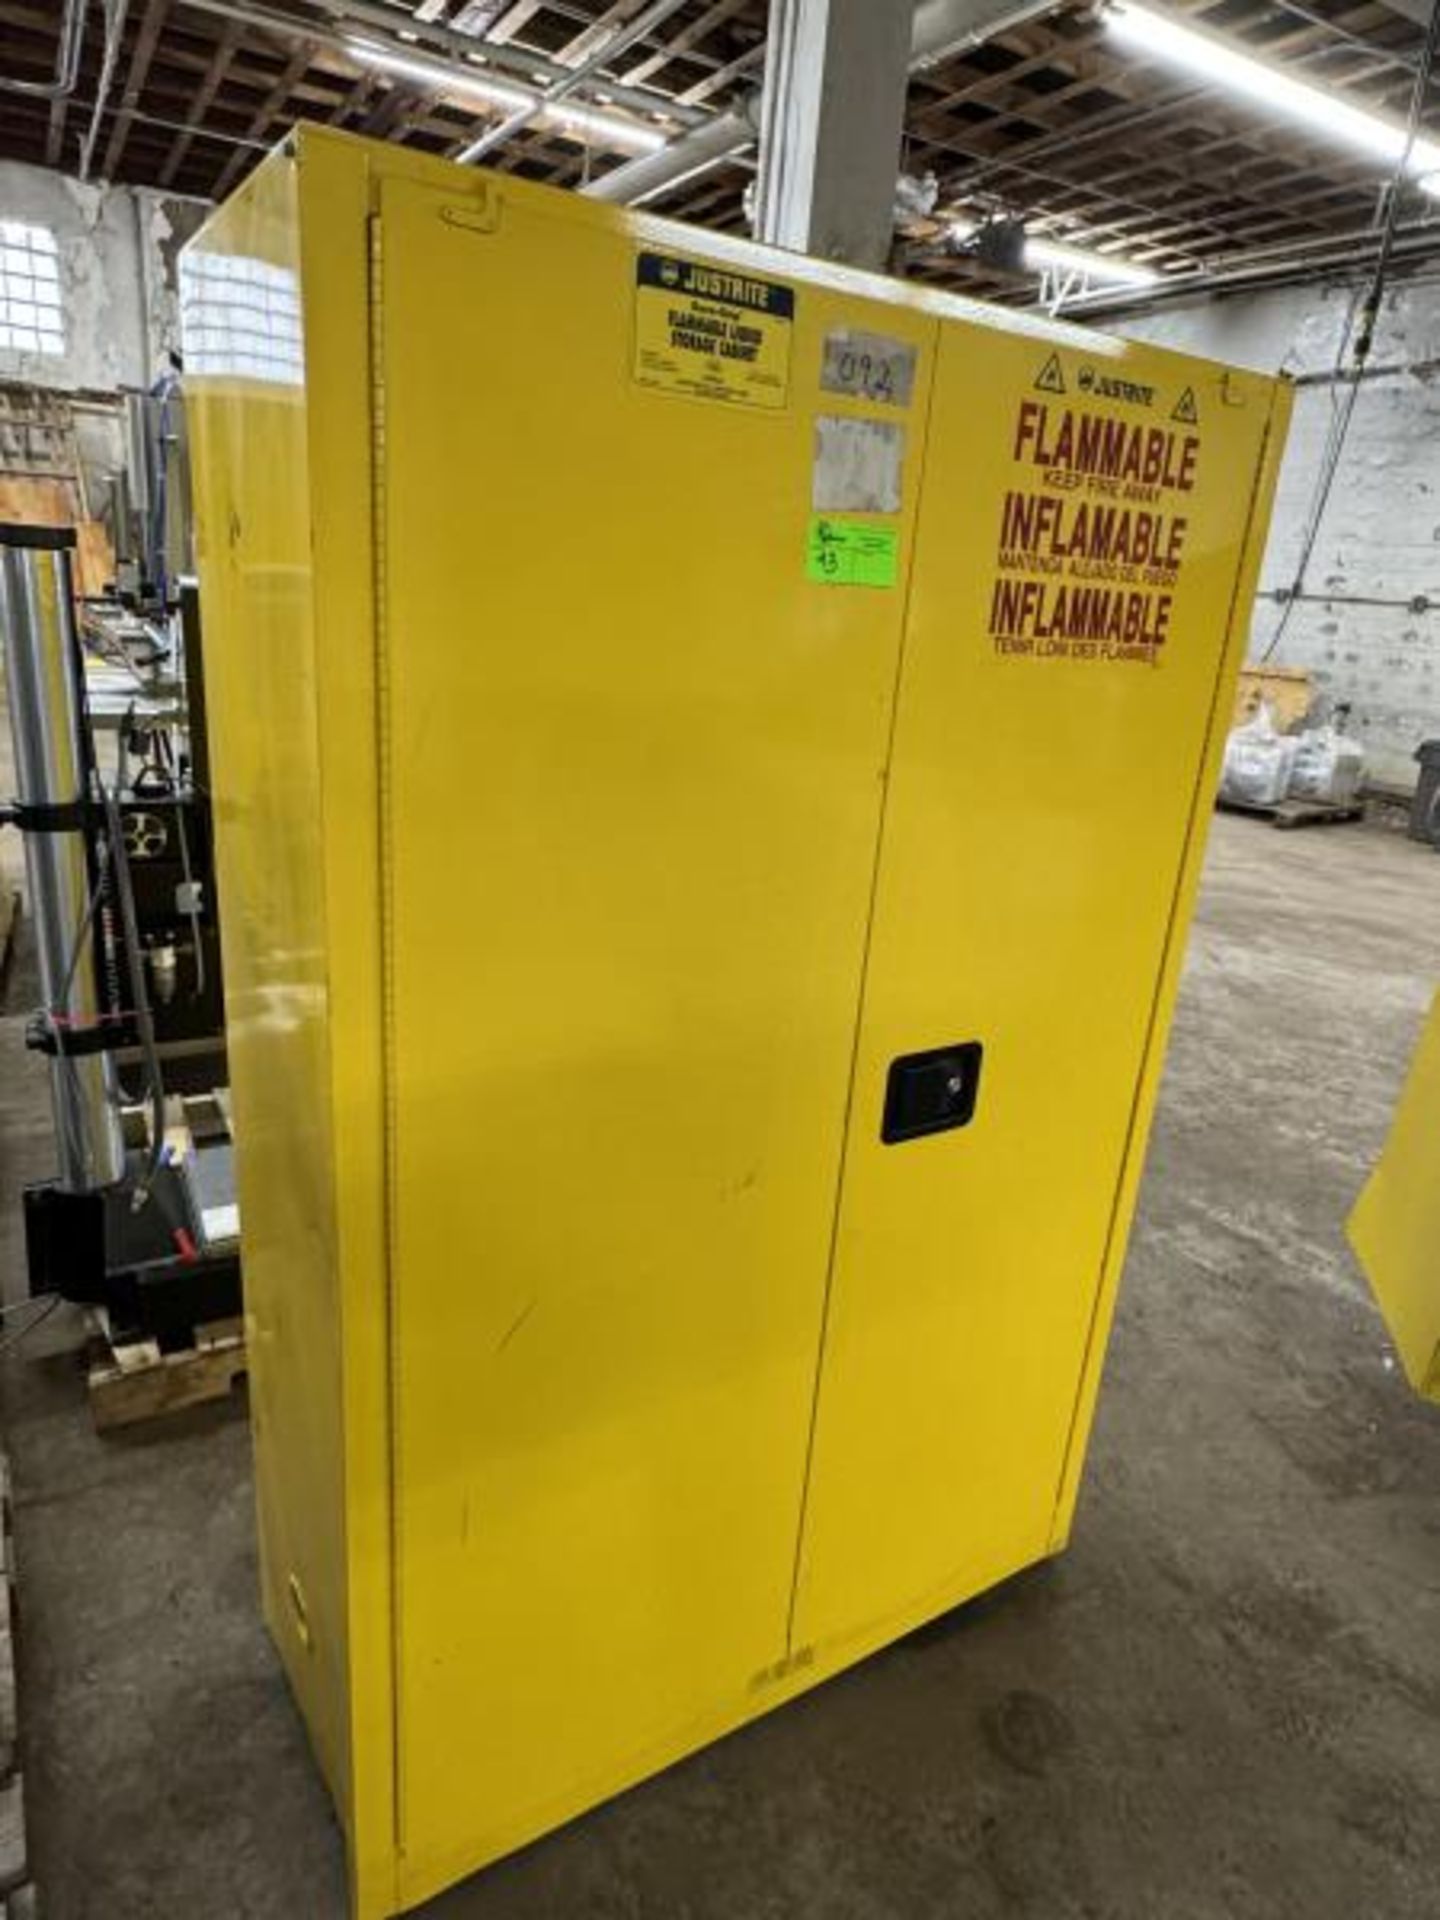 Justrite Flammable Liquid Storage Cabinet 43" Wide x 18" Deep x 65" Tall - Image 2 of 7